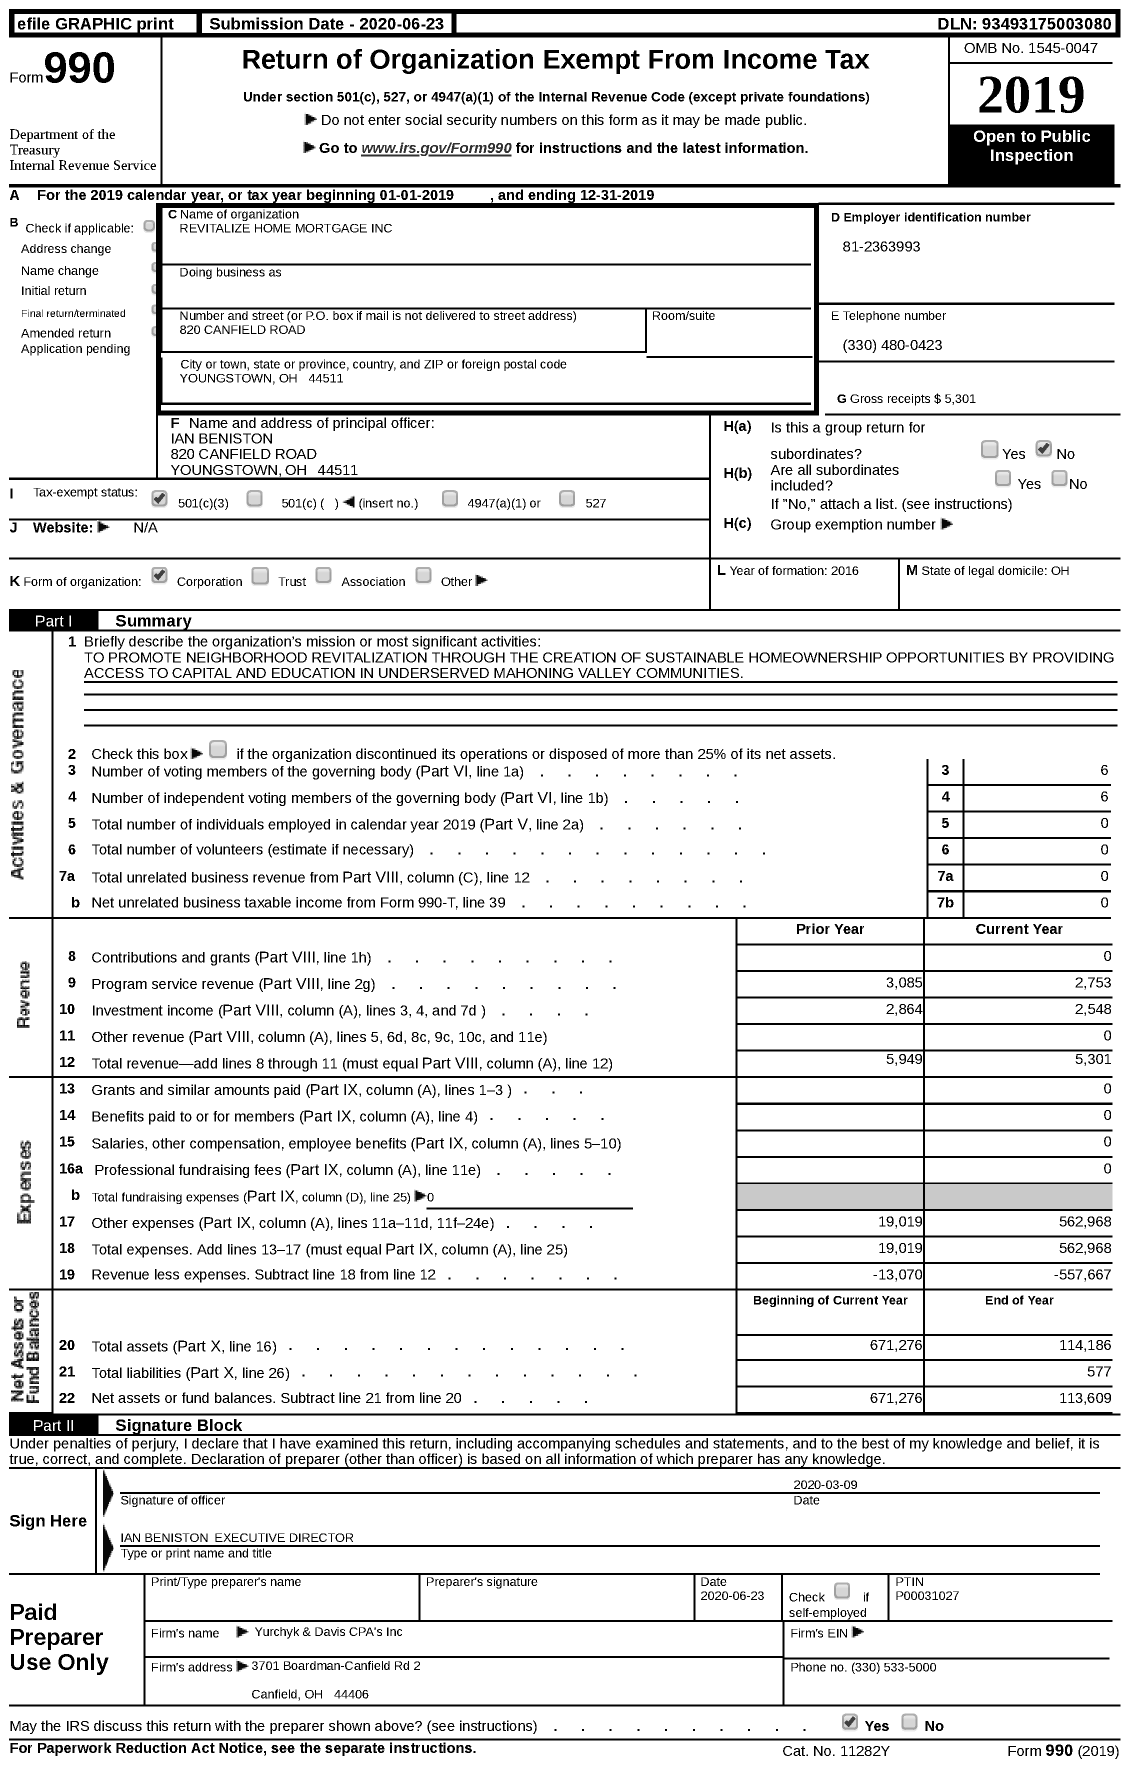 Image of first page of 2019 Form 990 for Revitalize Home Mortgage